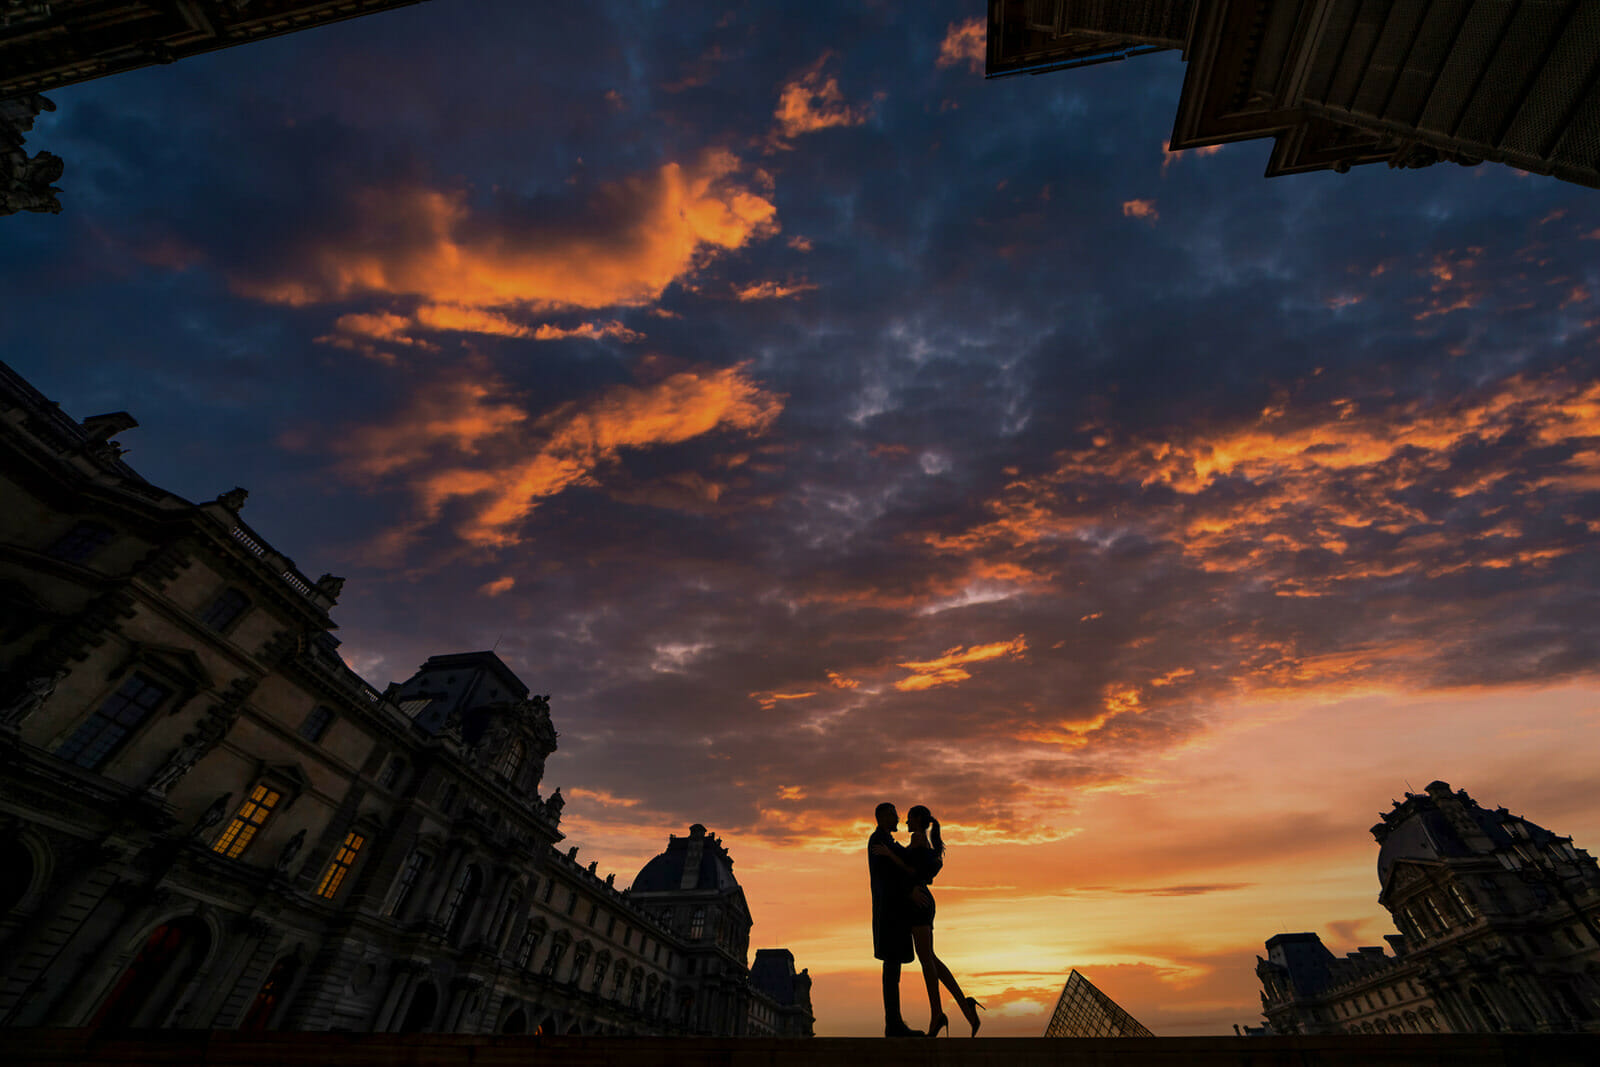 Dramatic nighttime Paris couple photo shoot at the Louvre Museum